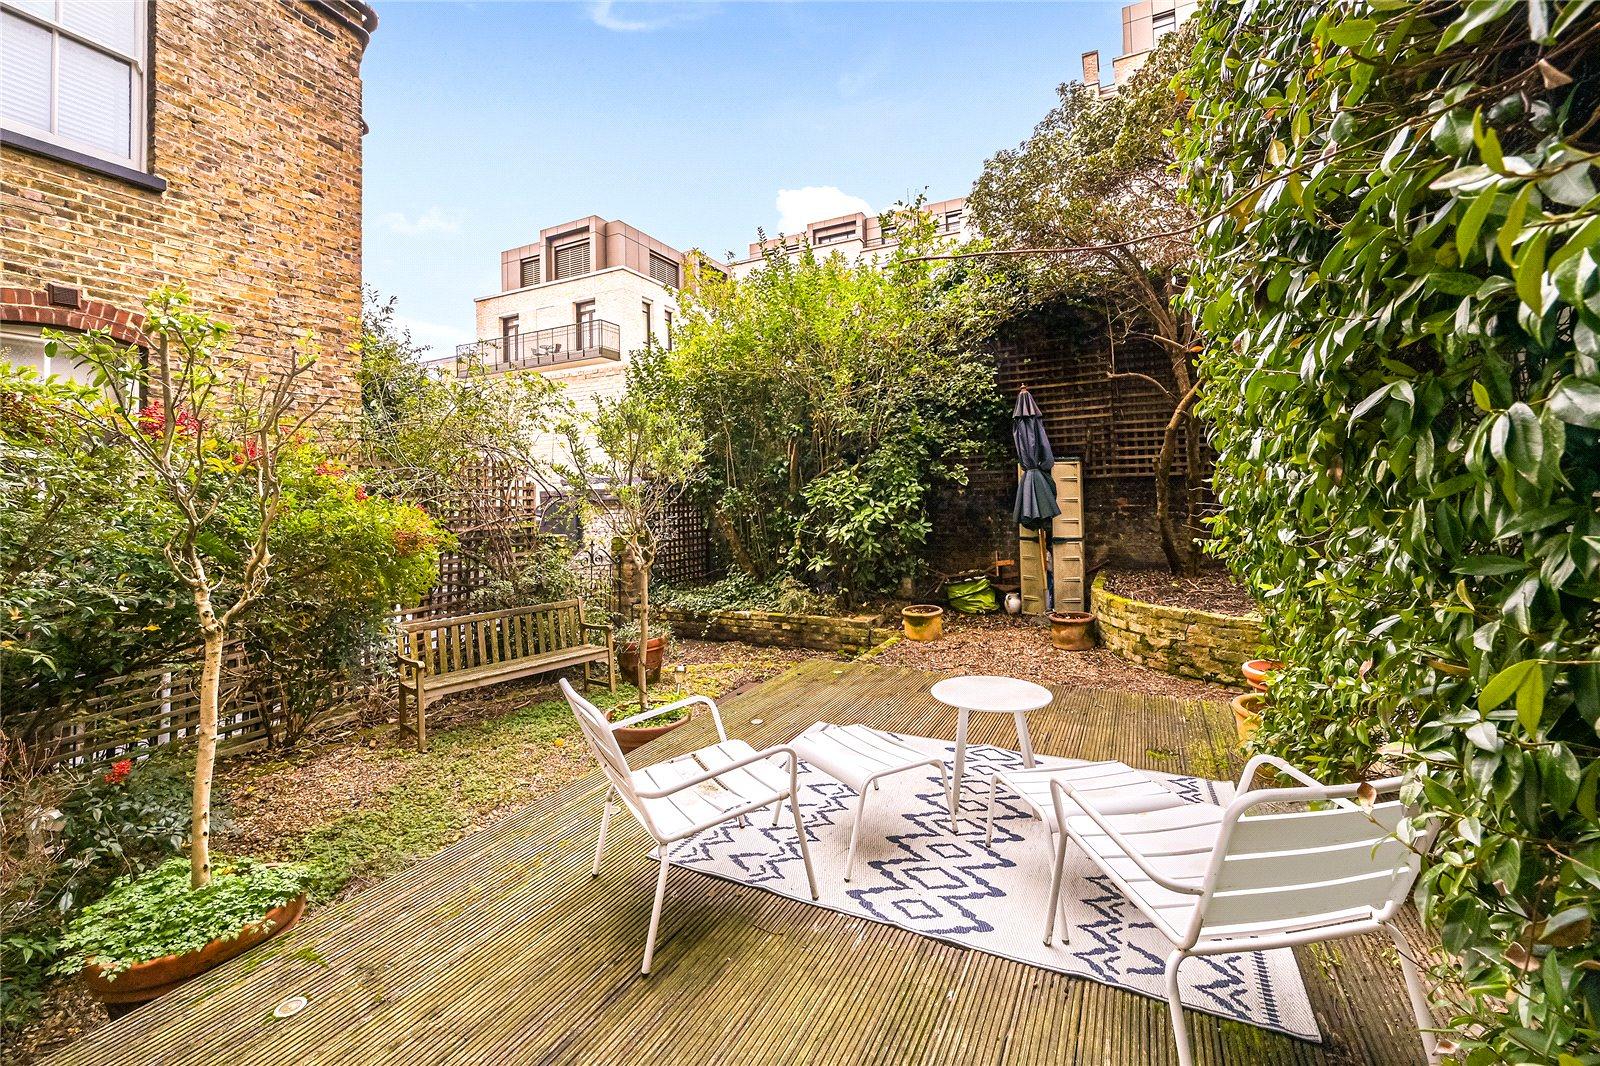 London apartment with garden for sale